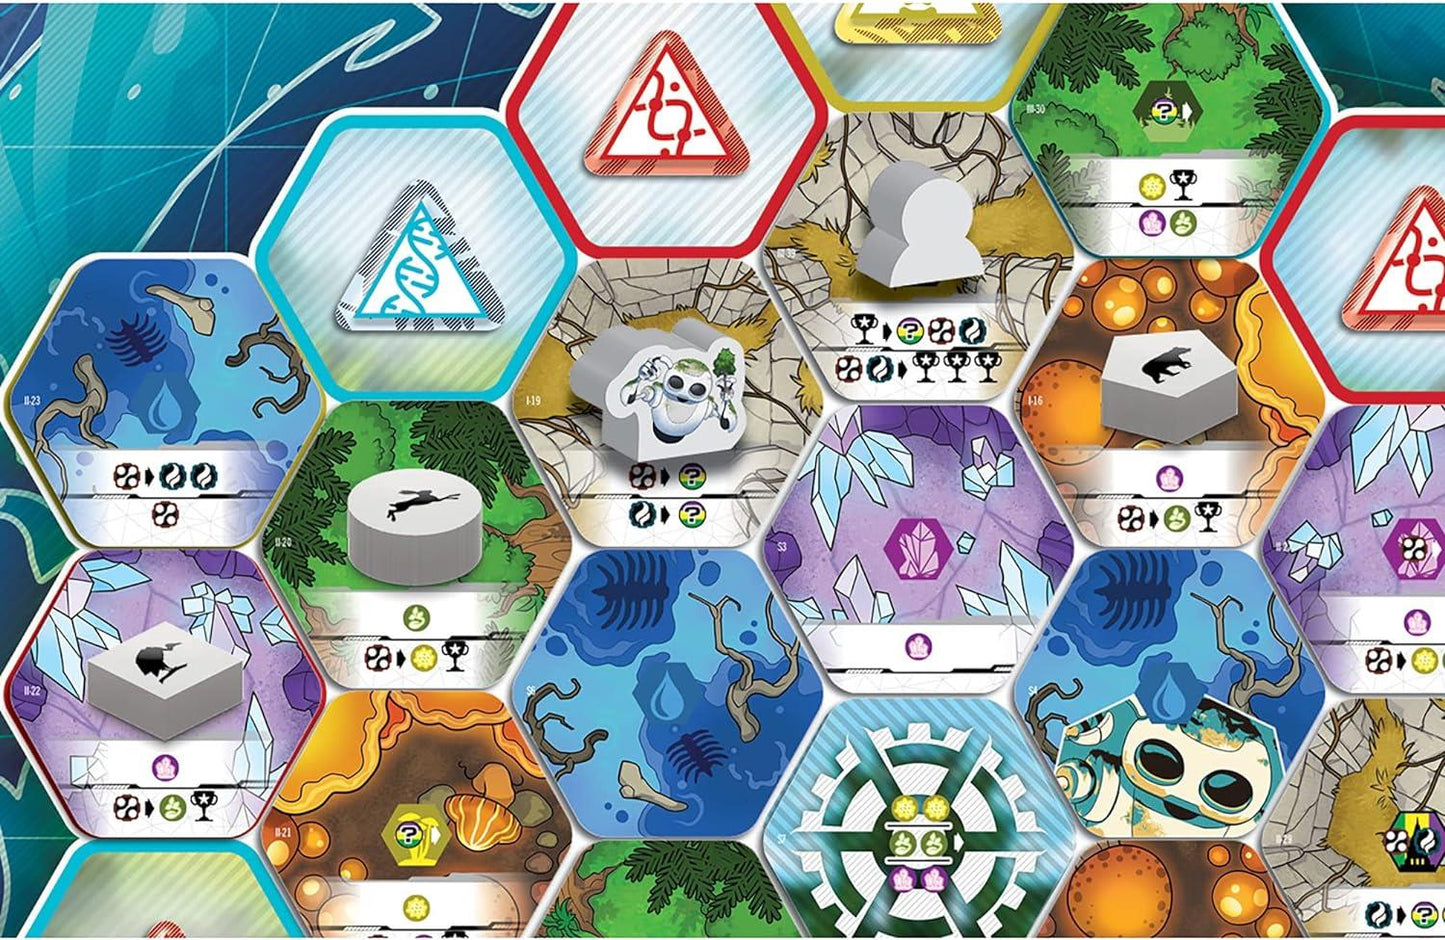 Shapers of Gaia Board Game by Wizkids